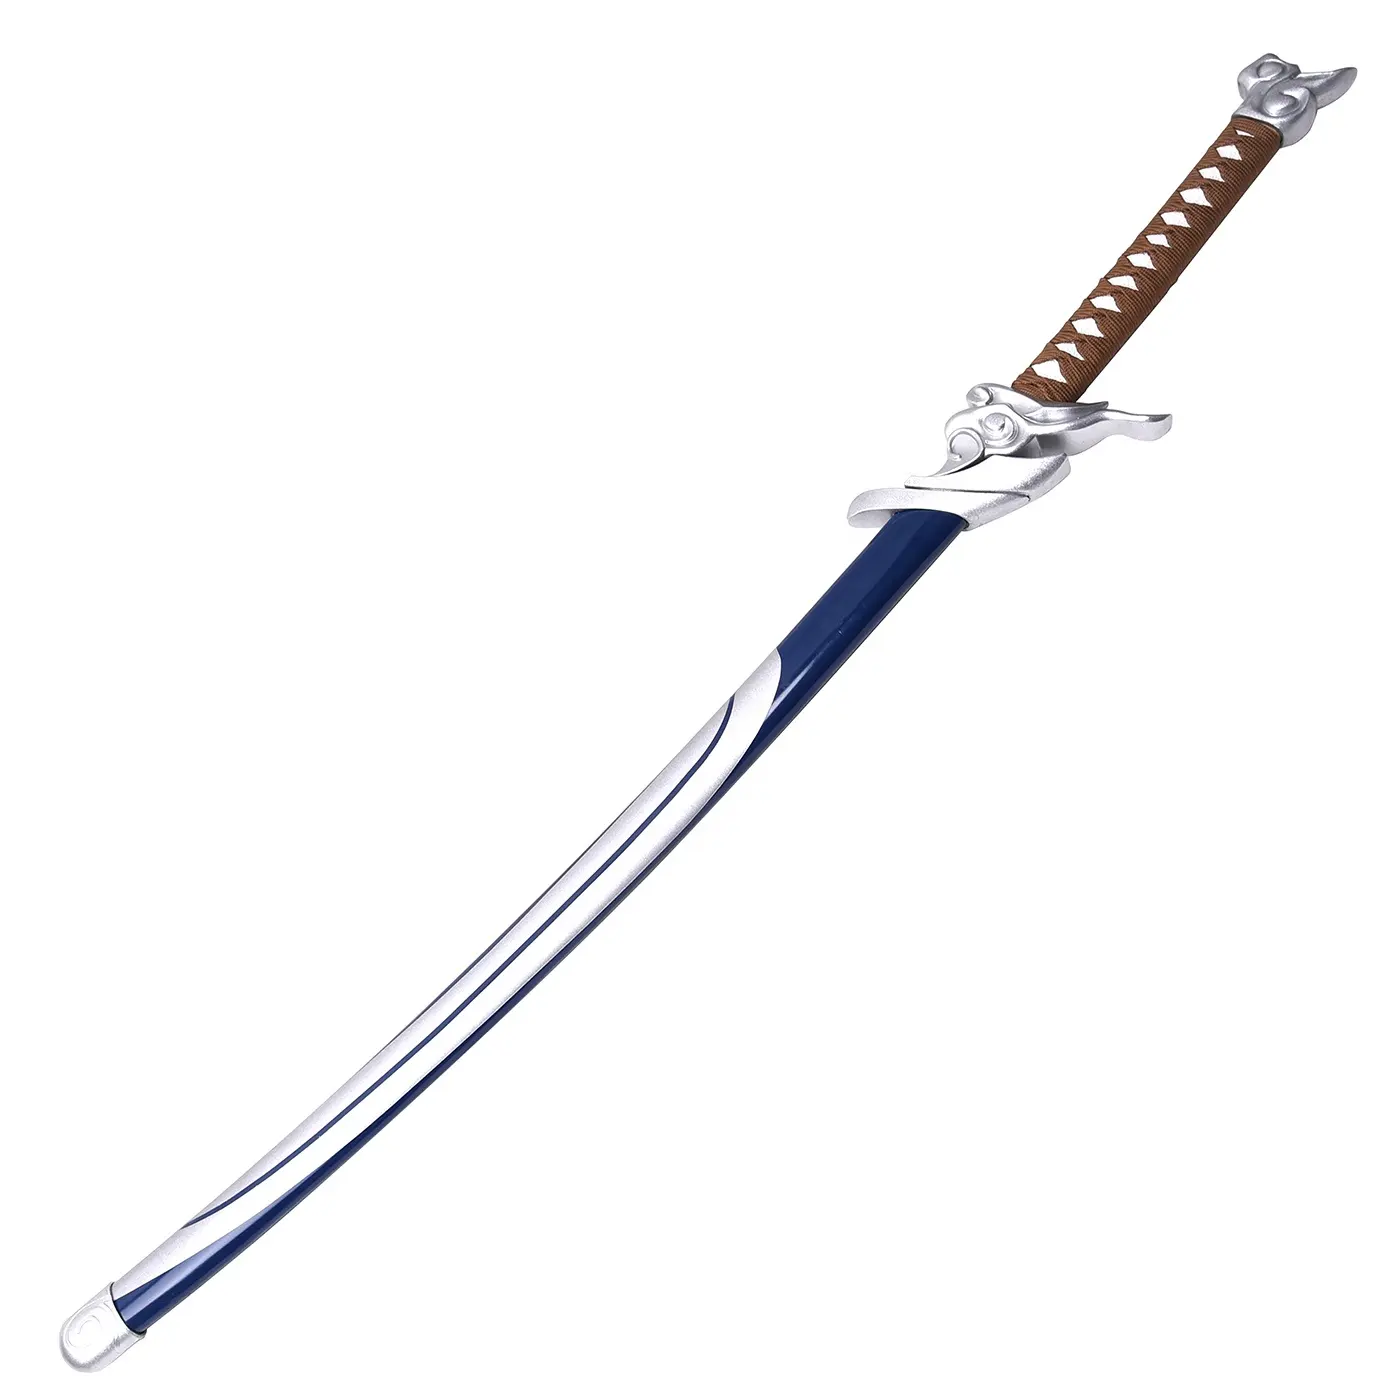 League of Legends The Unforgive sword Japanese sword toy swords for cosplay